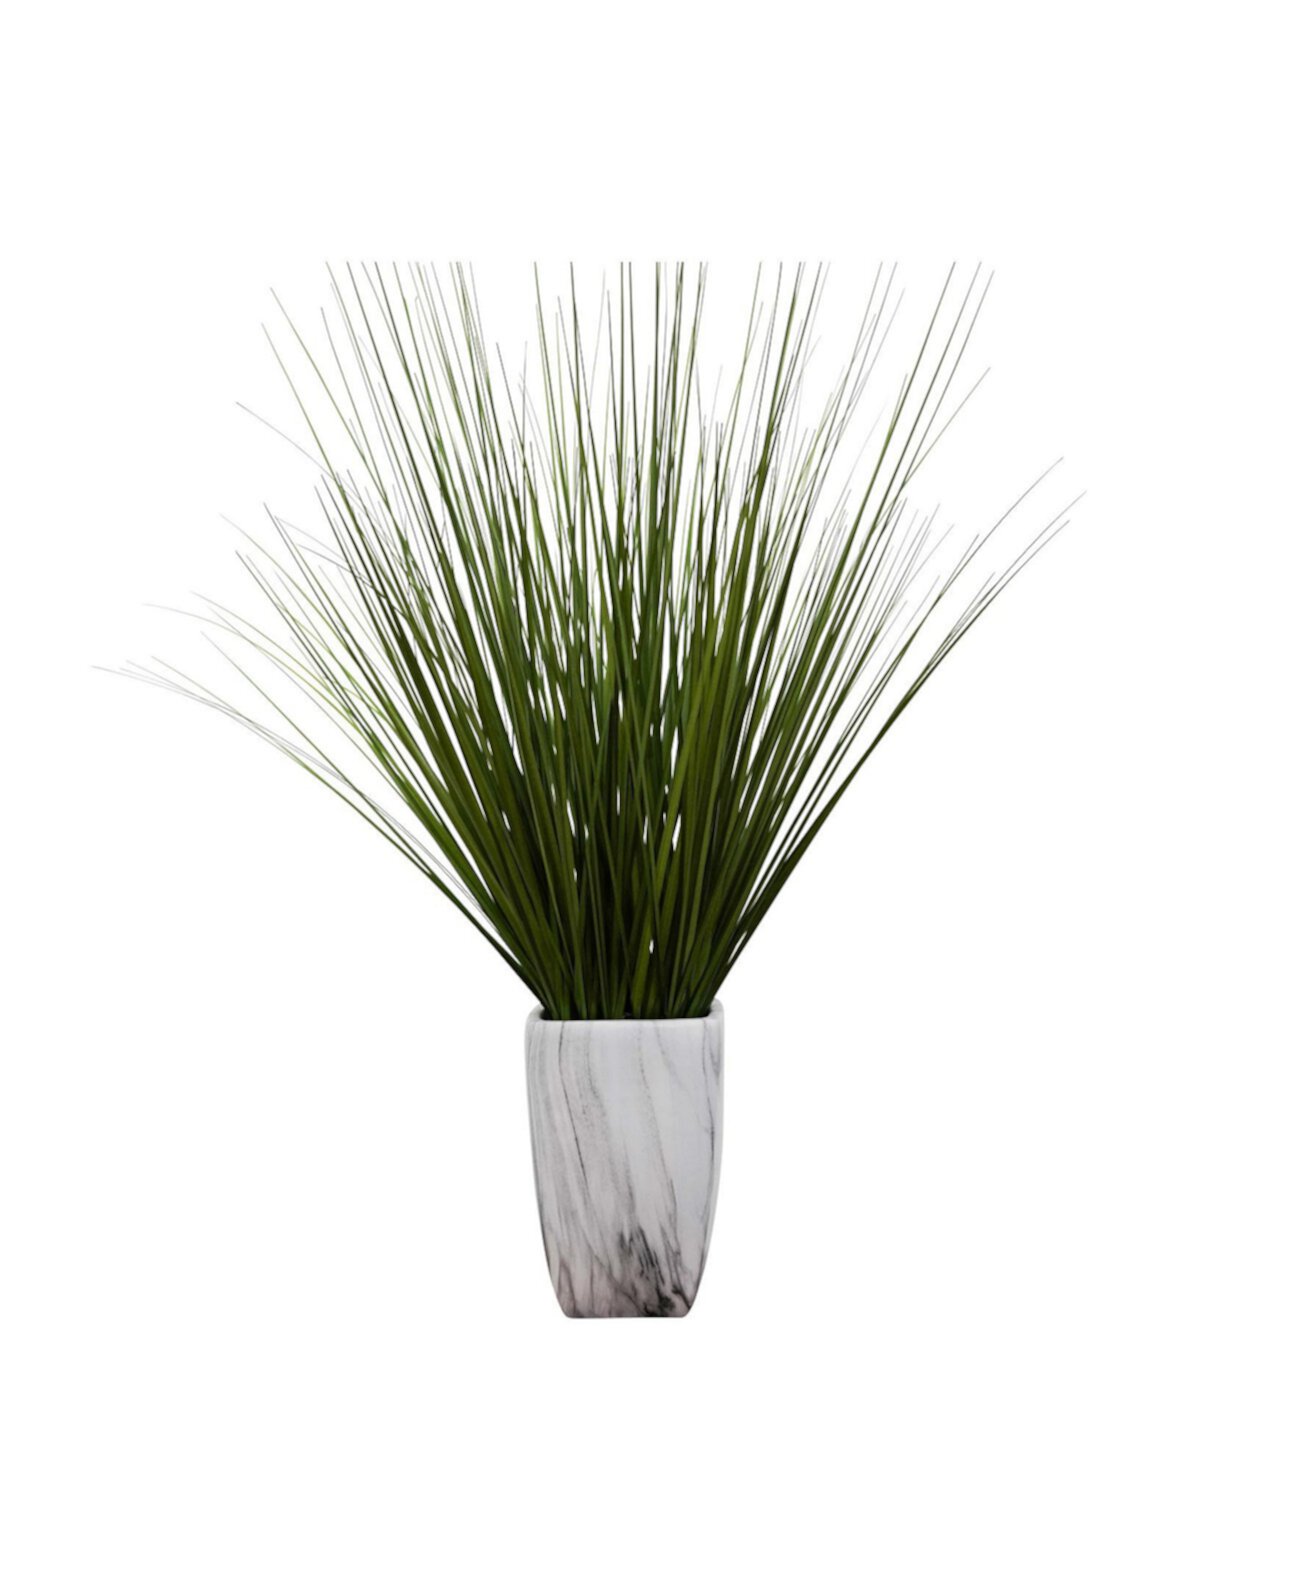 Tabletop Artificial Foliage in Marble Ceramic Pot, 32" Nature's Elements